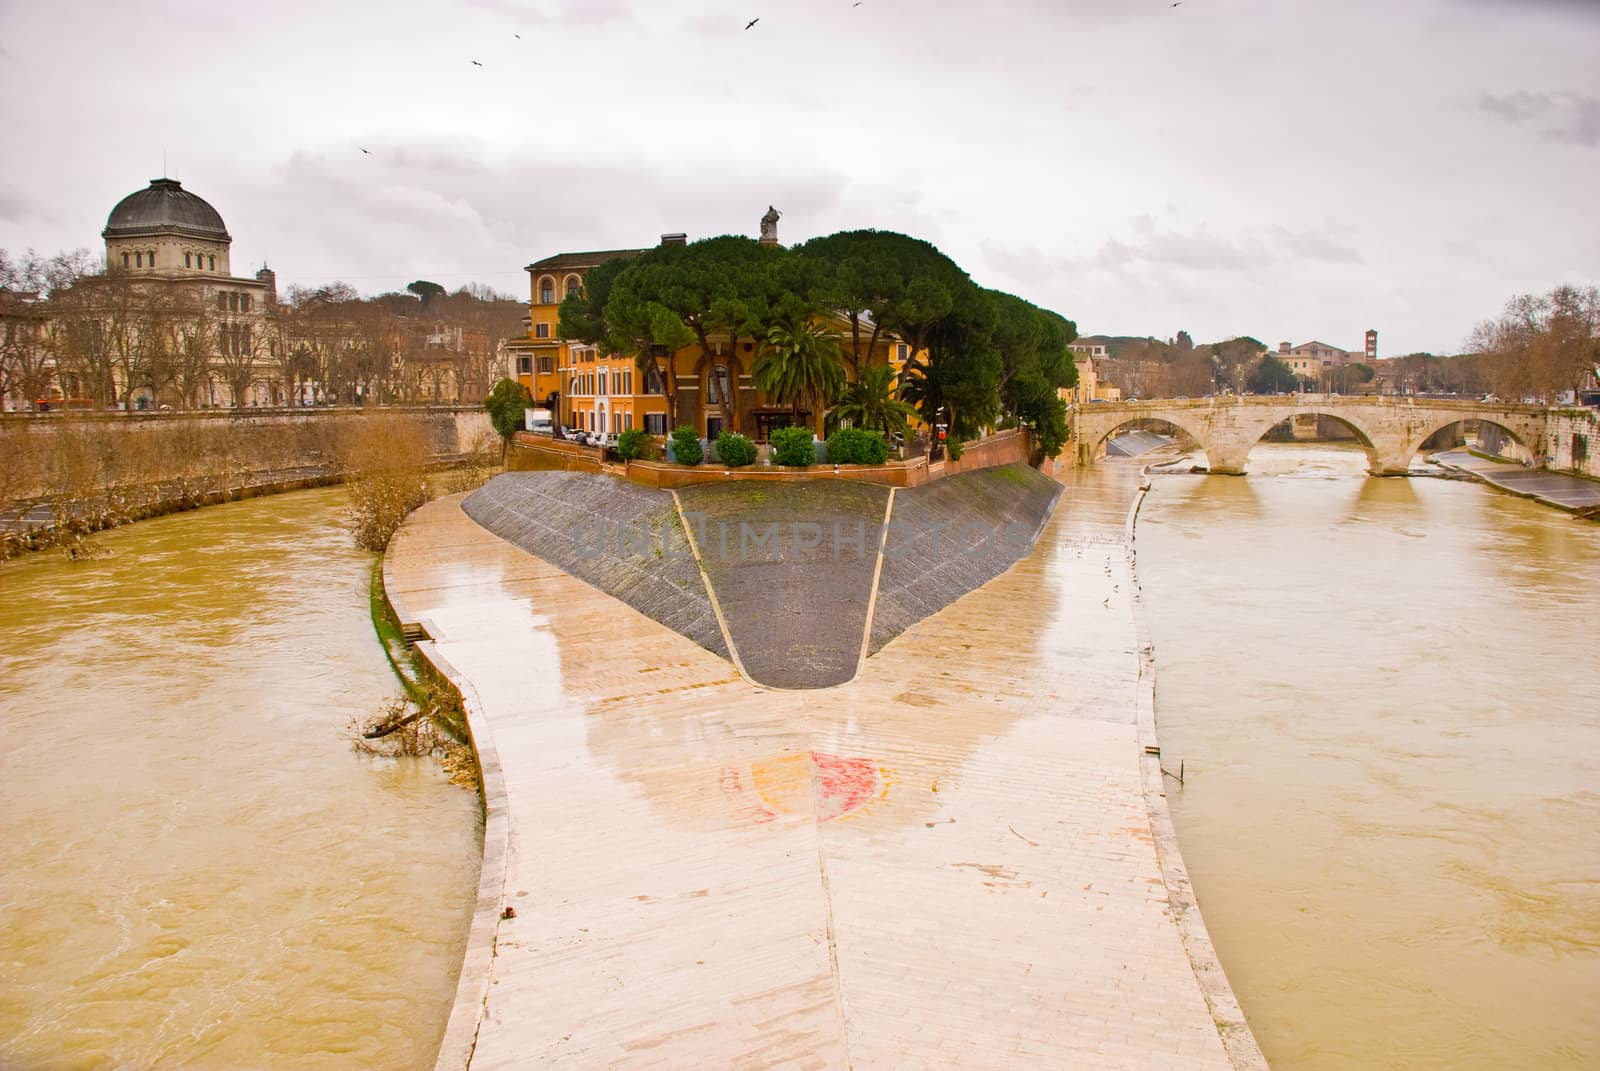 View across the River Tiber to Isola Tiberina in Rome. The island was modeled to resemble a ship by the romans in the 2nd century BC